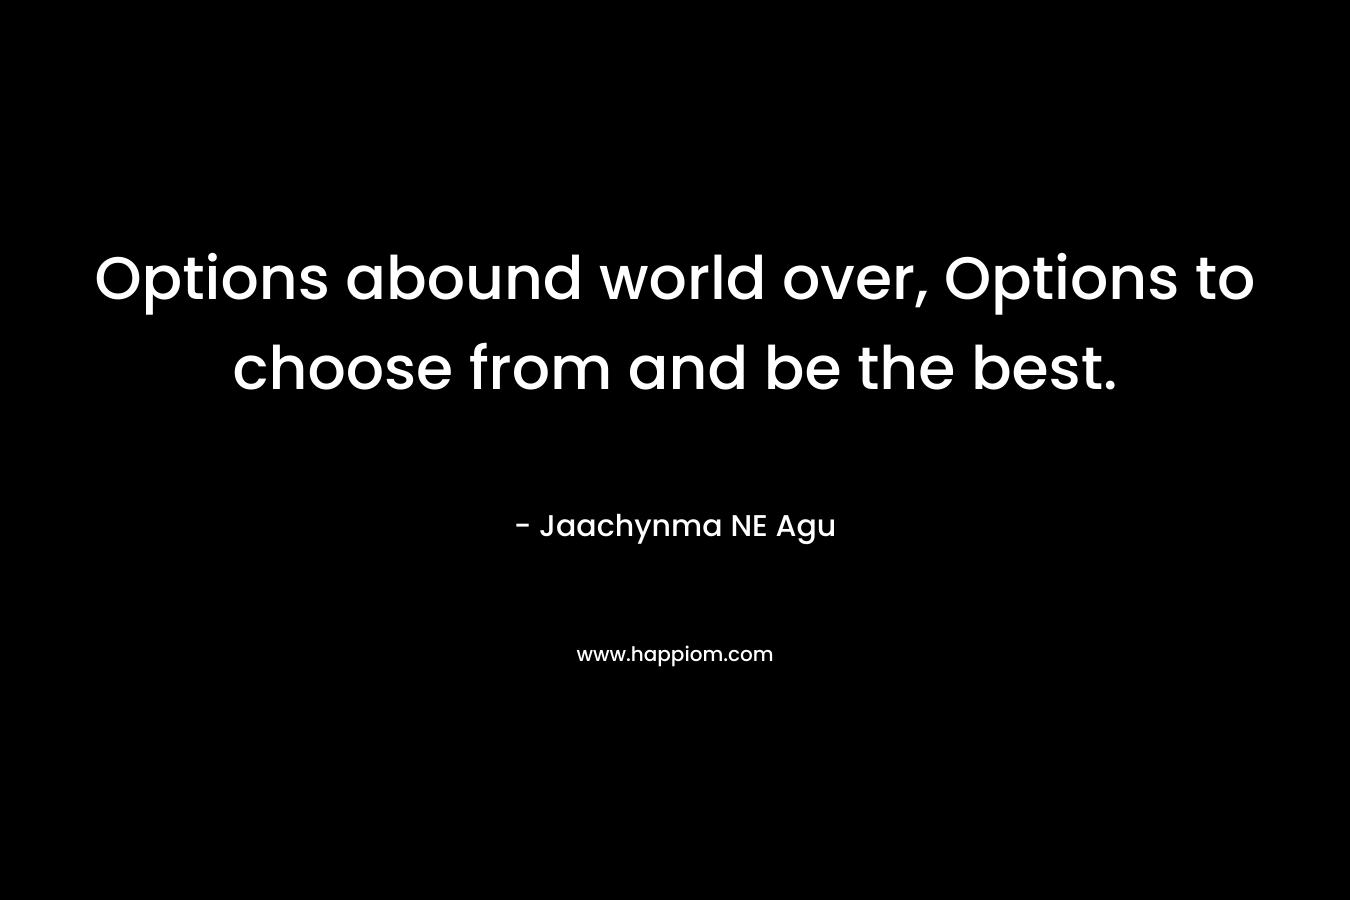 Options abound world over, Options to choose from and be the best.